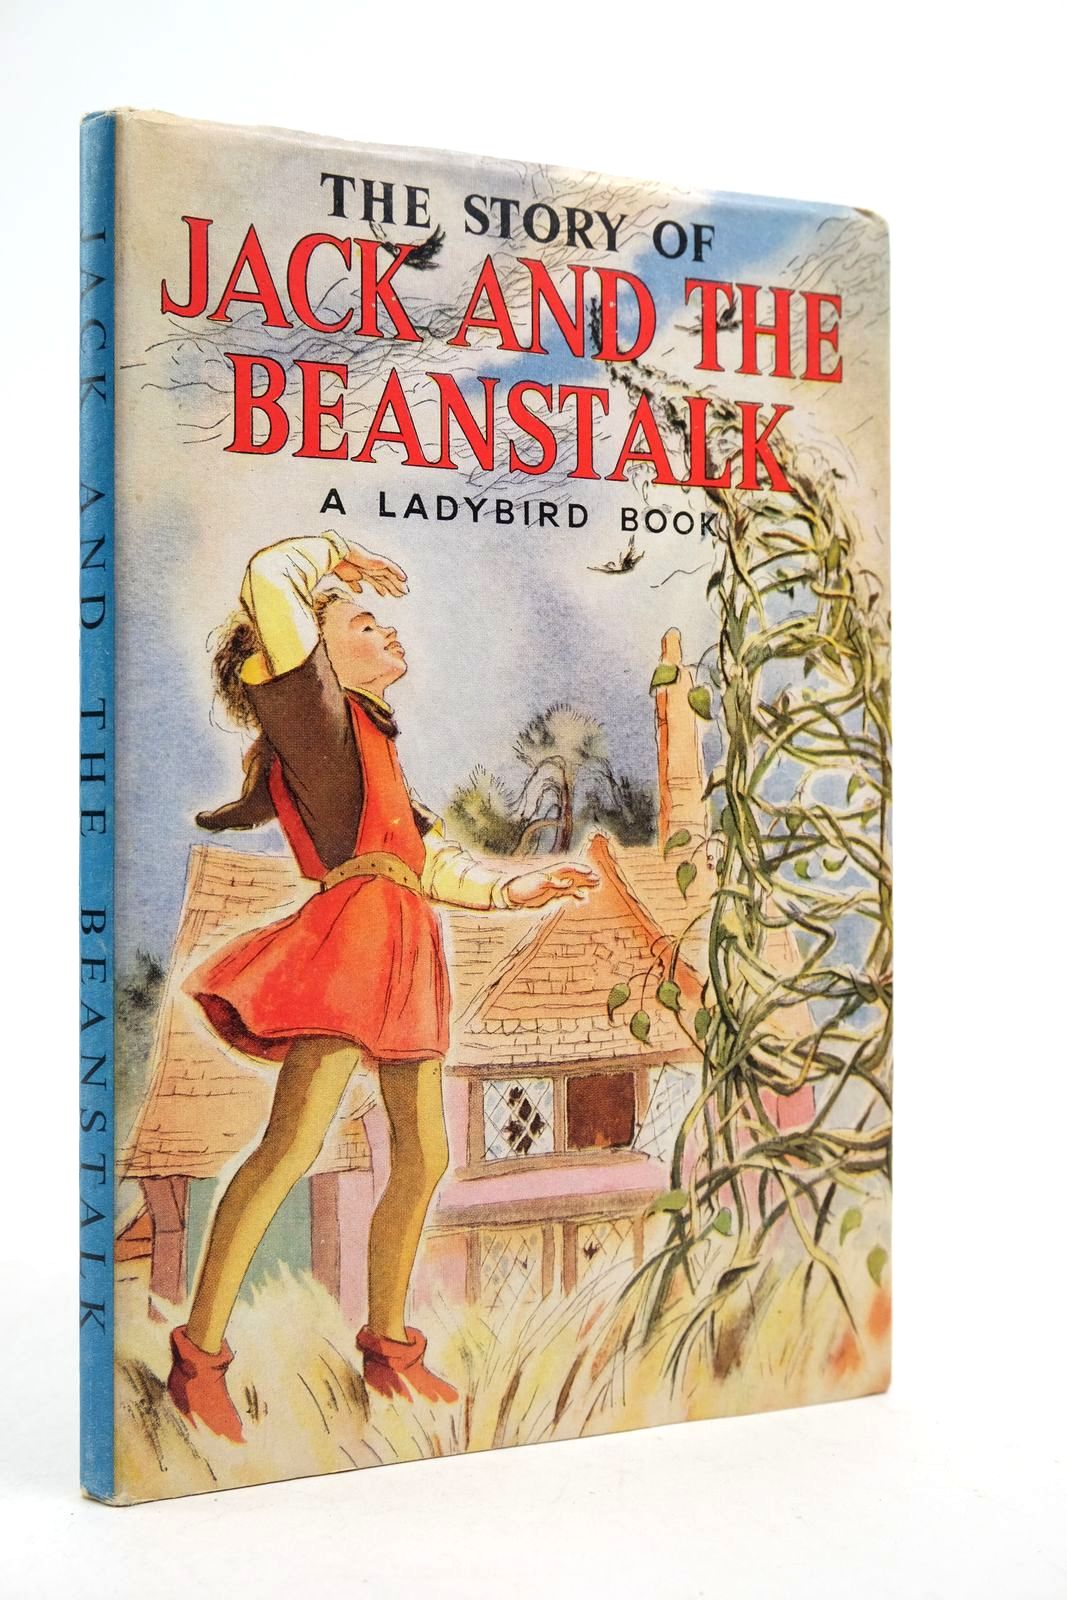 Photo of THE STORY OF JACK AND THE BEANSTALK written by Levy, Muriel illustrated by Murrell, Ruth published by Wills & Hepworth Ltd. (STOCK CODE: 2139677)  for sale by Stella & Rose's Books